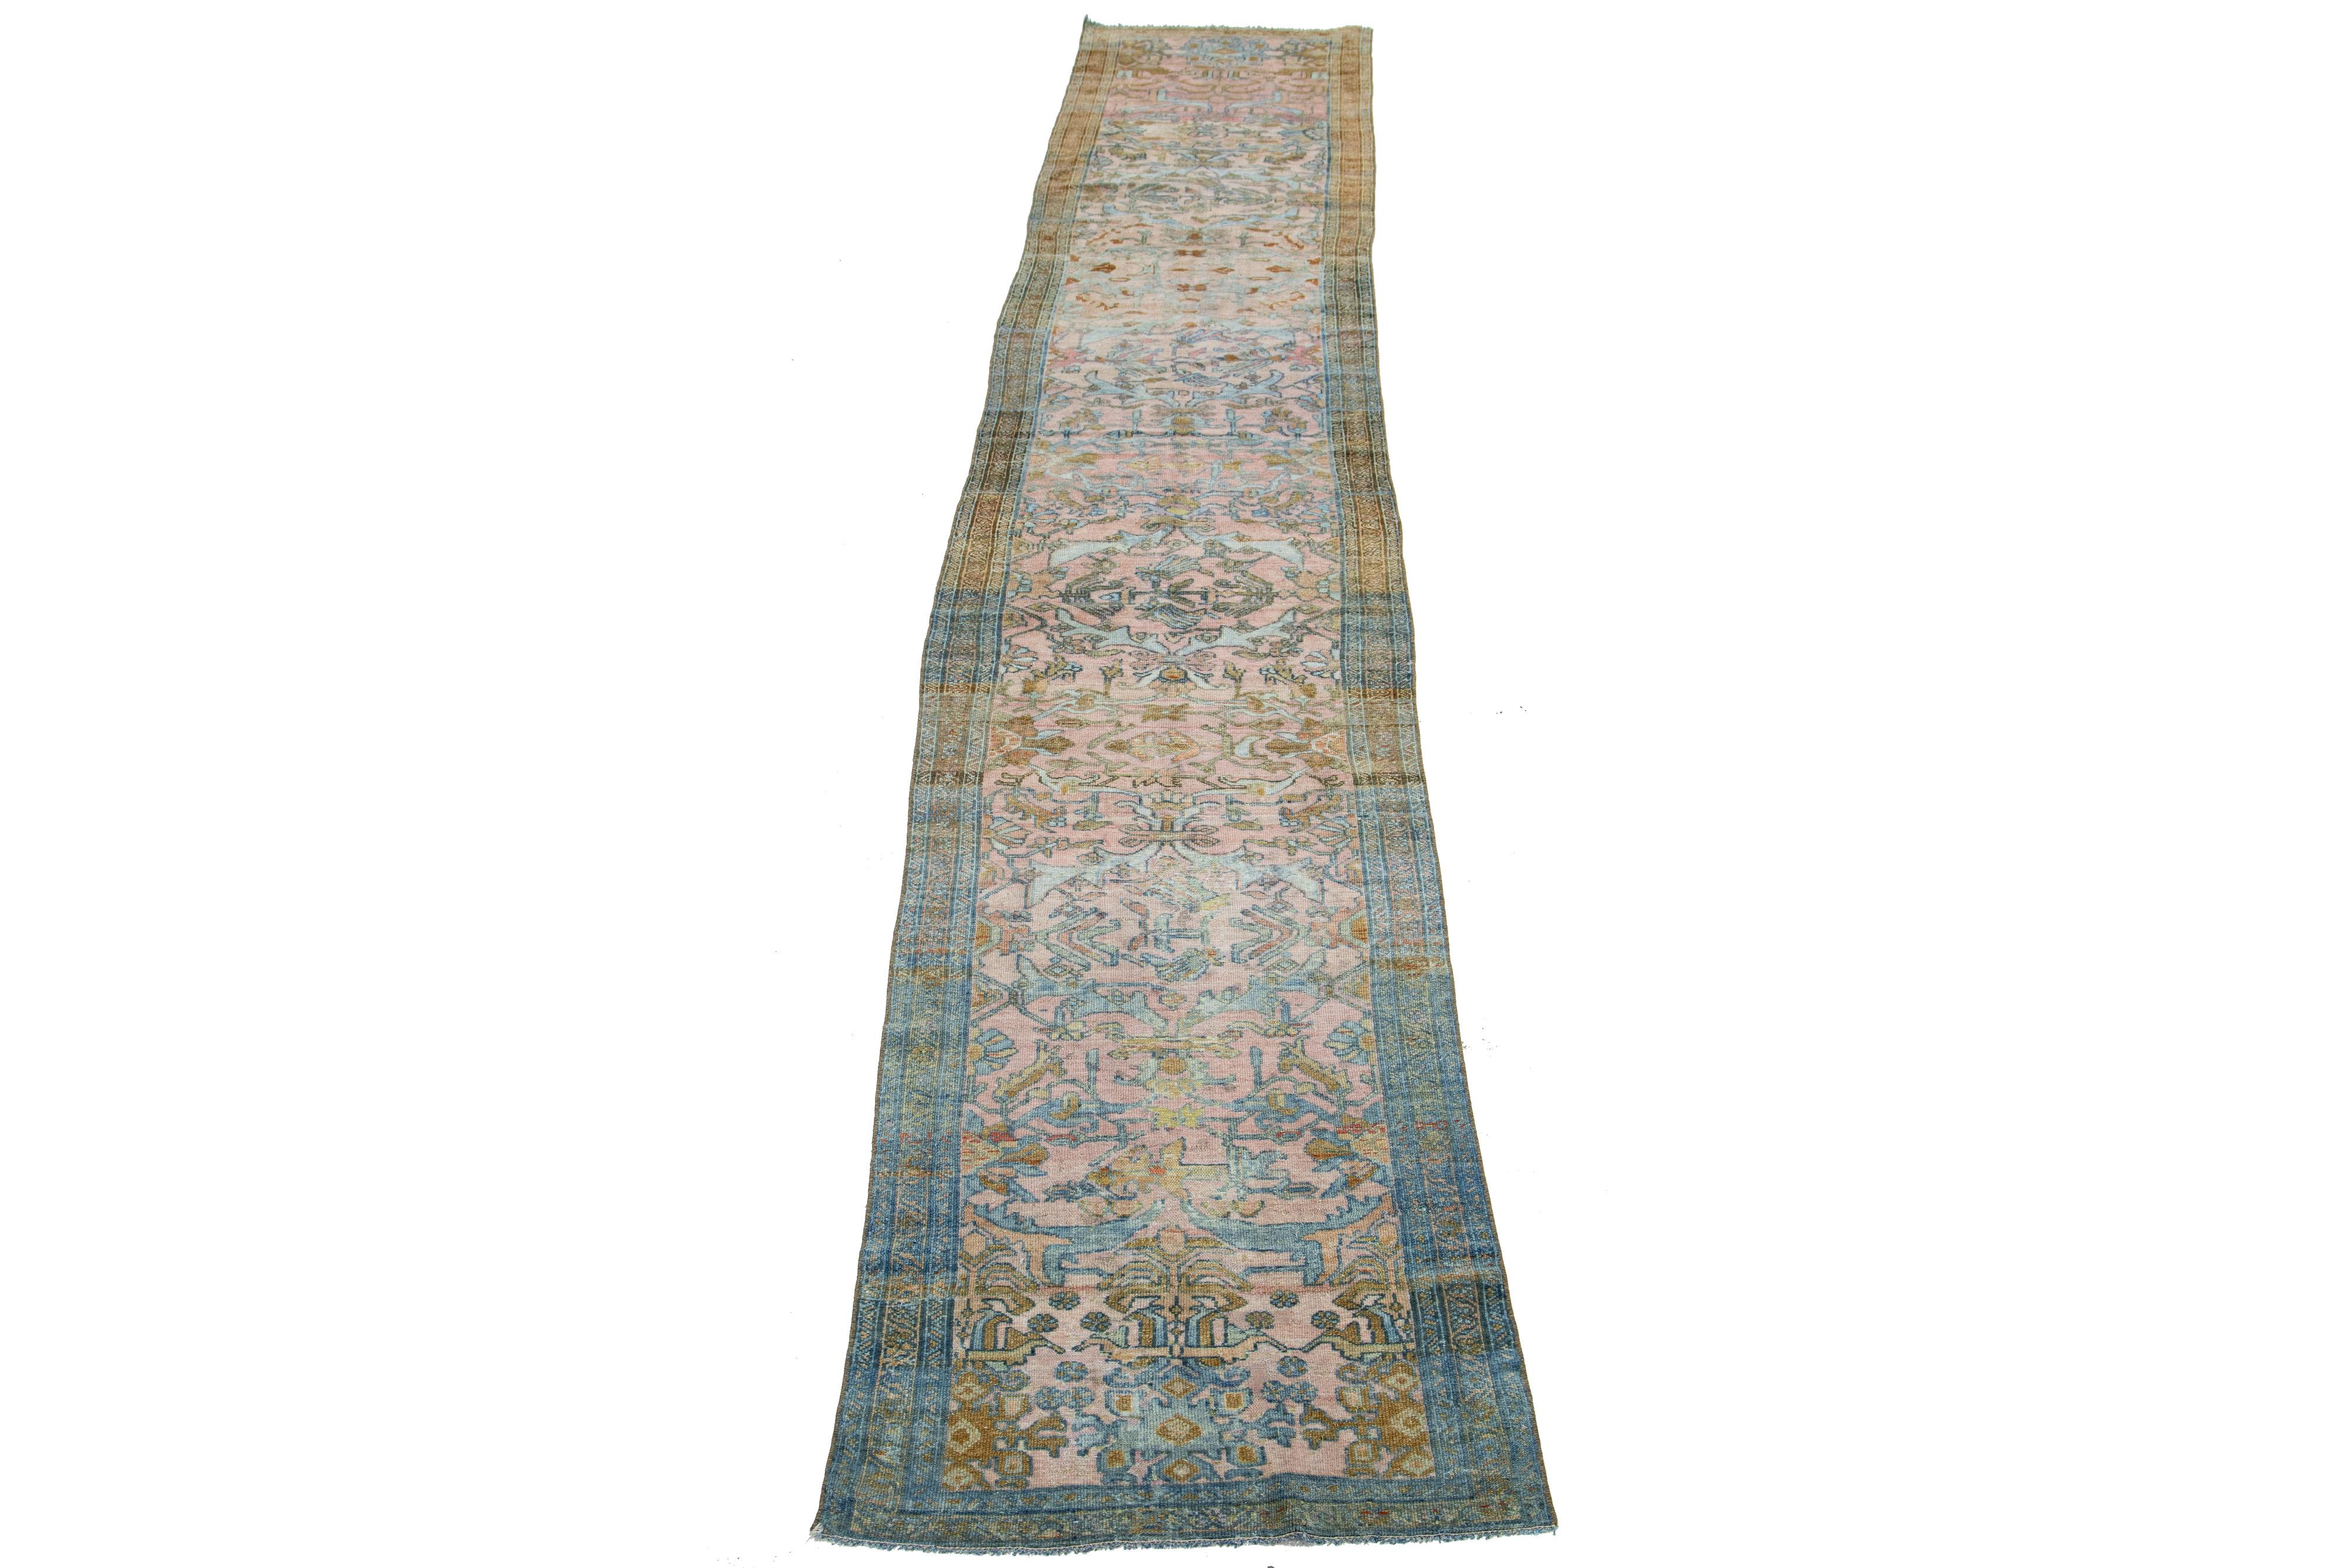 Beautiful antique Lilihan hand-knotted wool runner with a pink field. This Persian has blue borders with an all-over floral pattern design in brown accents. 

This rug measures 2'6